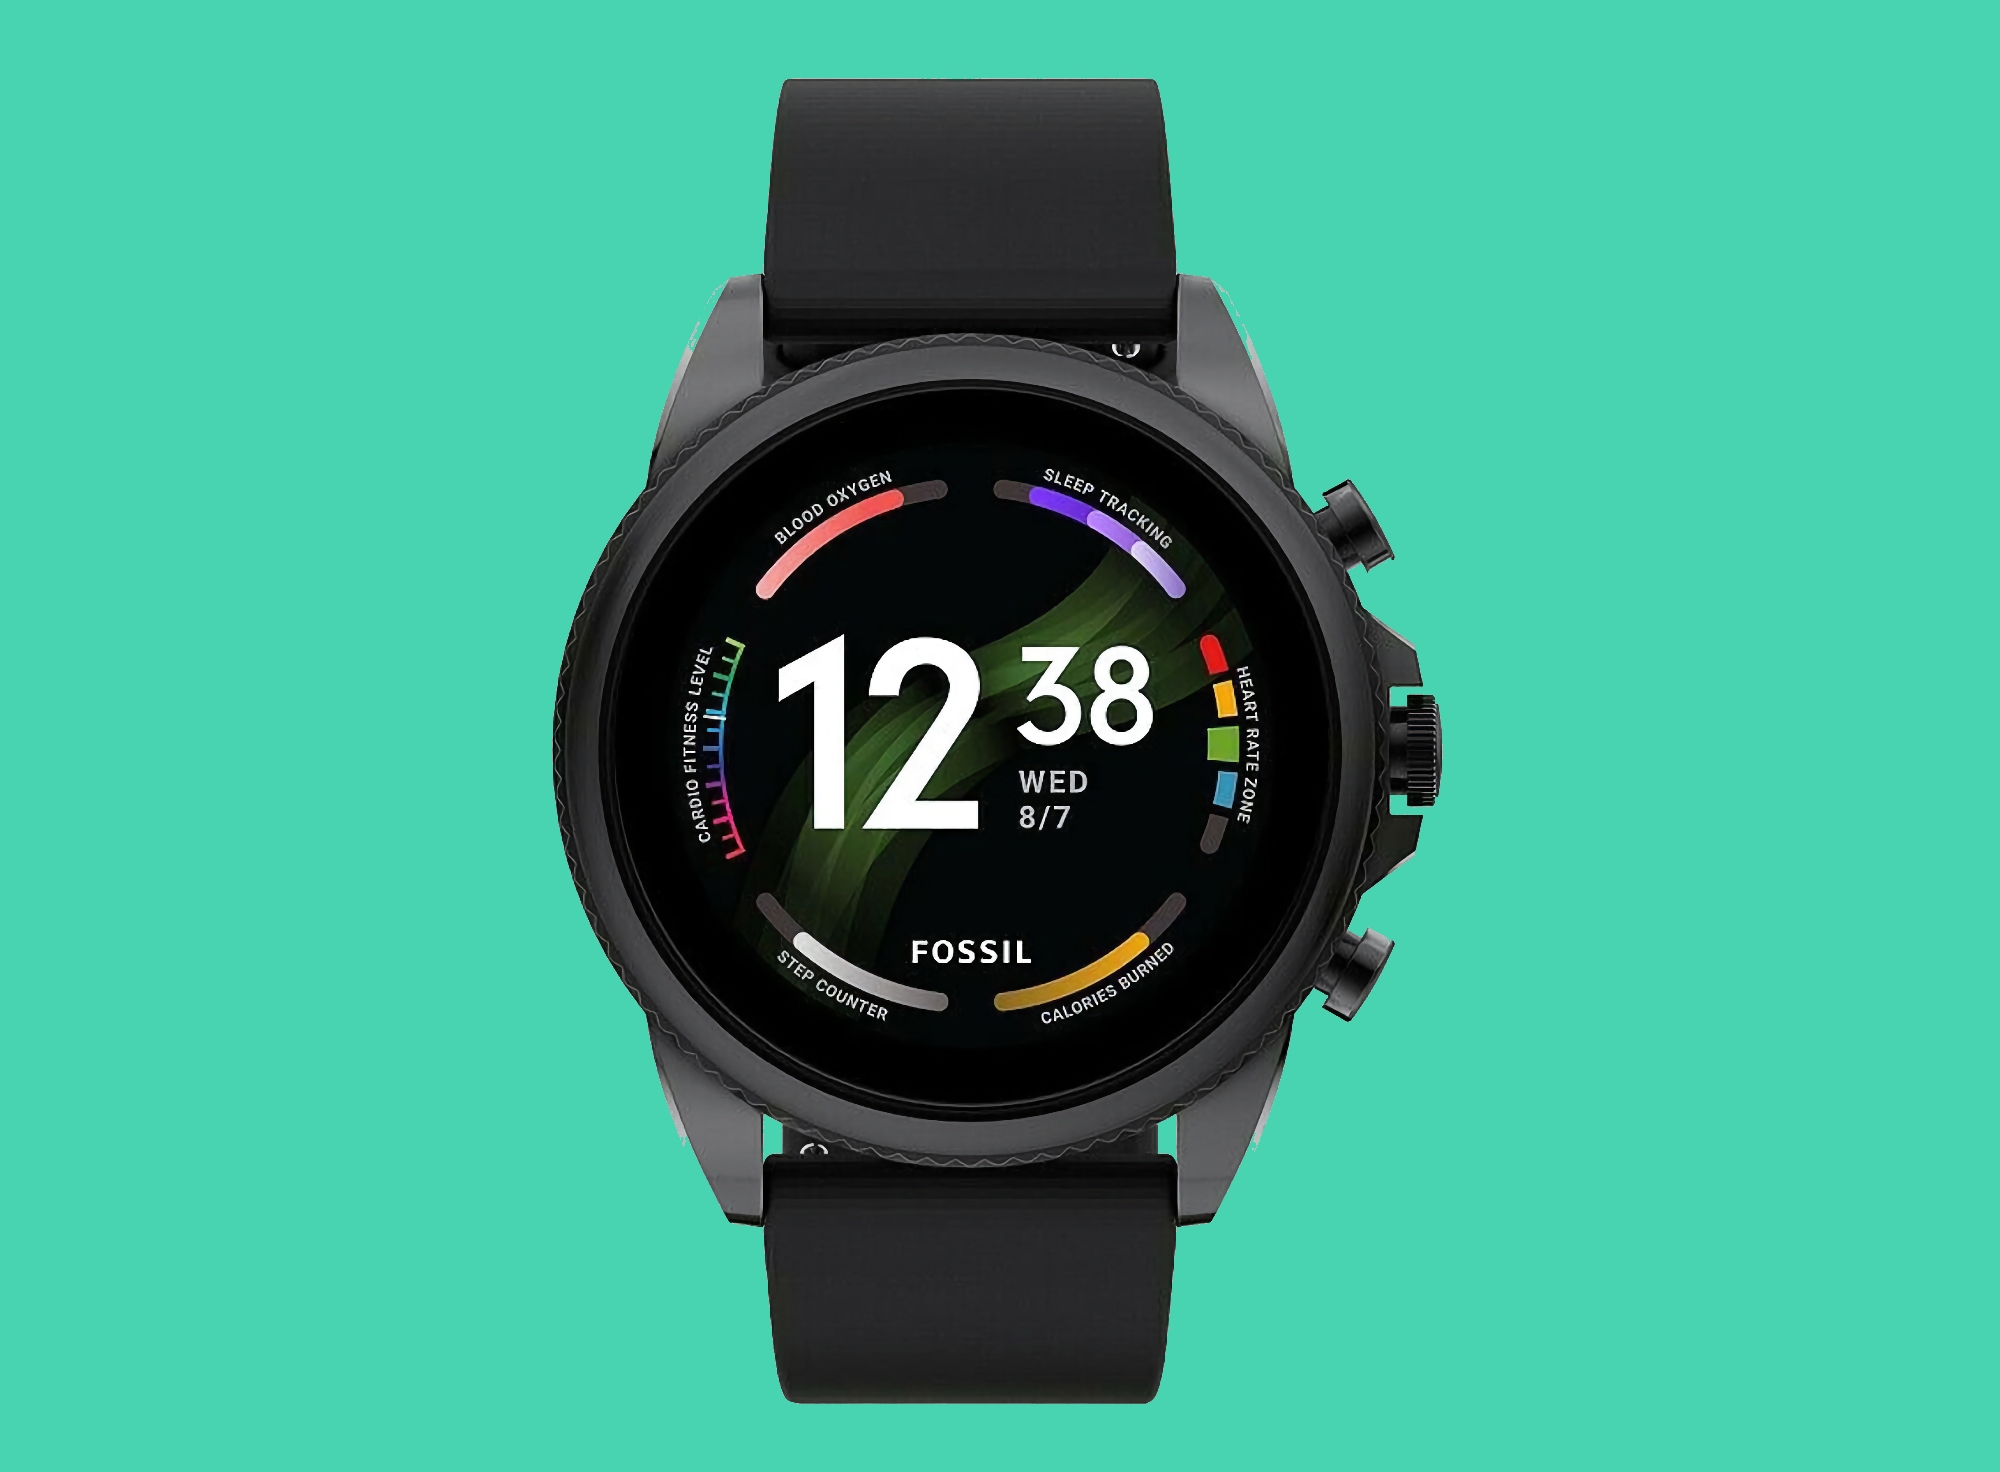 Fossil Gen 6 on Amazon: a smartwatch with a 44mm case, NFC and Wear OS on board at a discounted price of $151